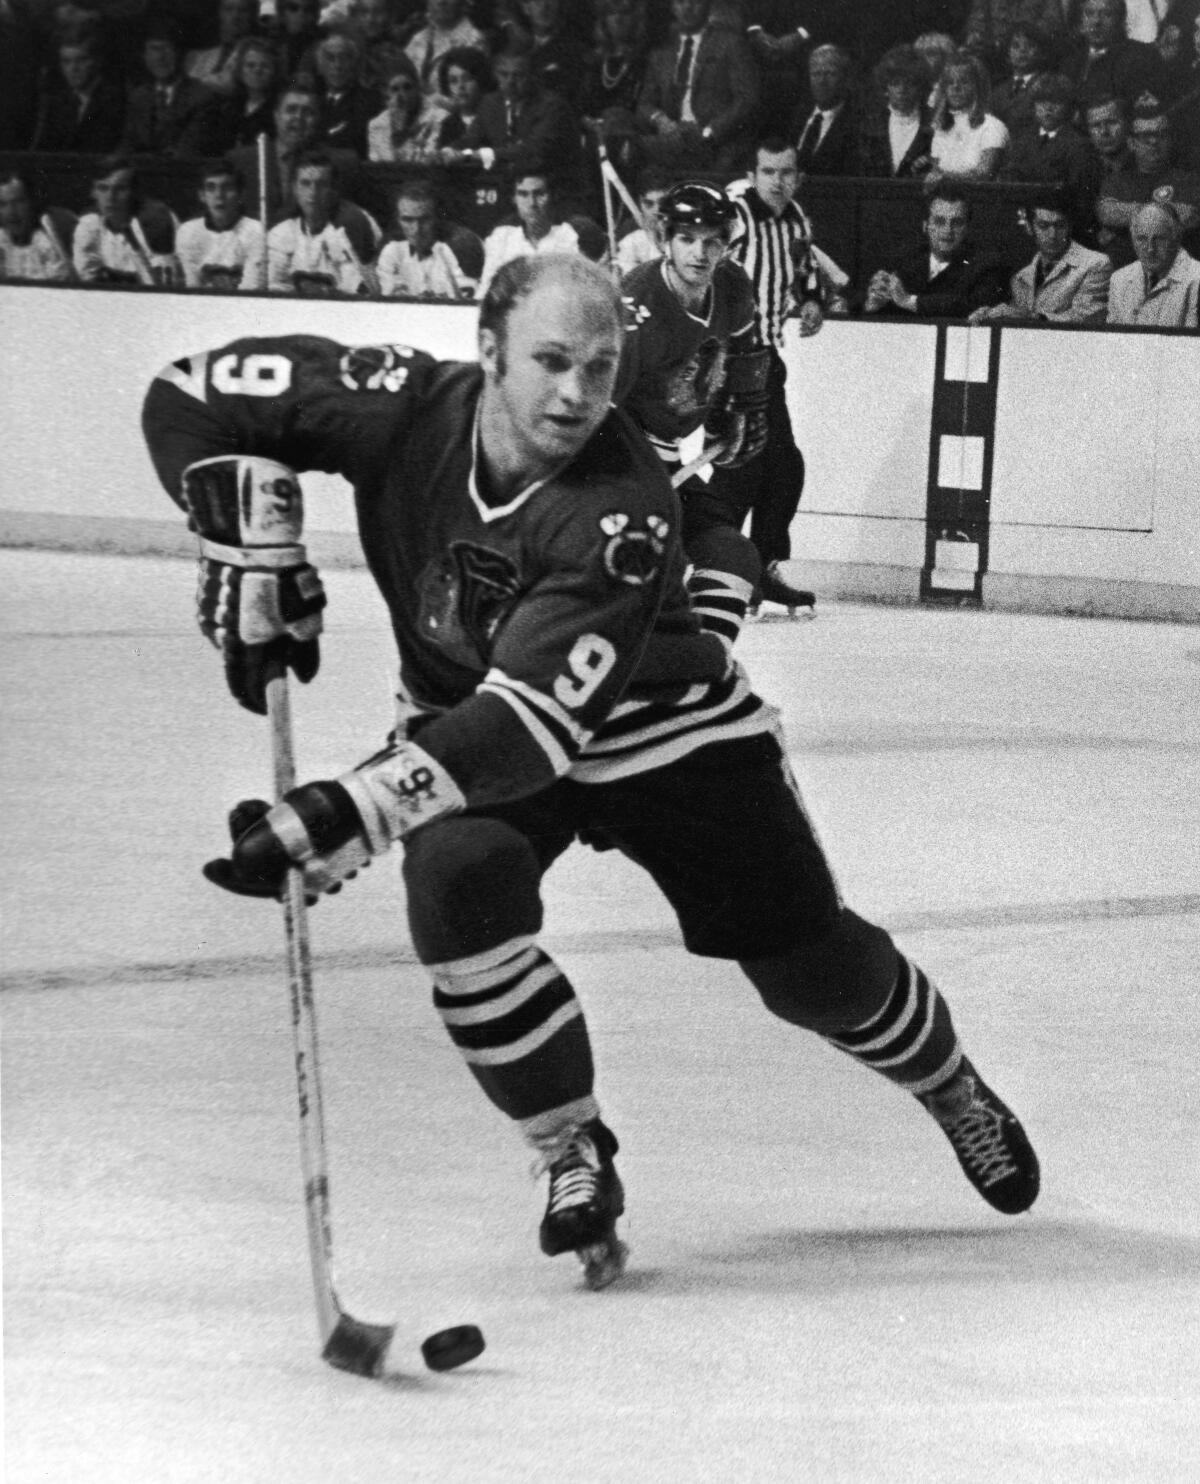 Definitely influential:' Hockey legend Bobby Hull dead at age 84